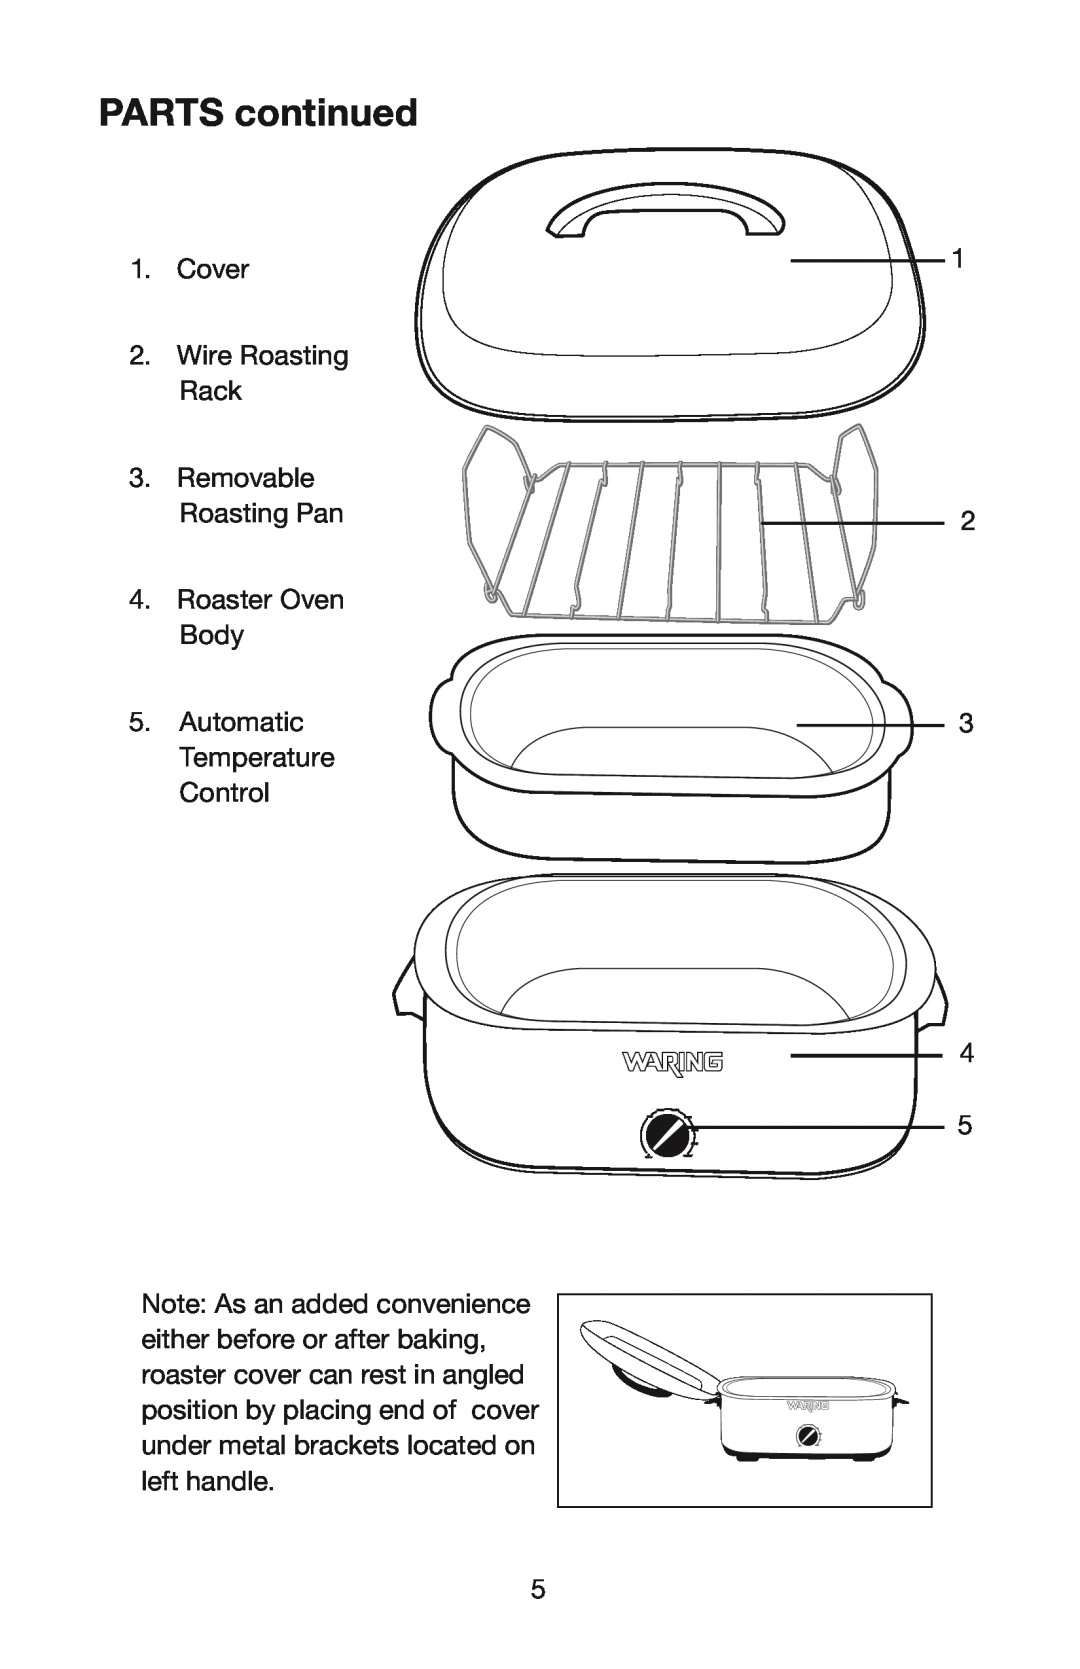 Waring RO18B manual Parts continued, Cover 2.Wire Roasting Rack, Removable Roasting Pan 4.Roaster Oven Body 